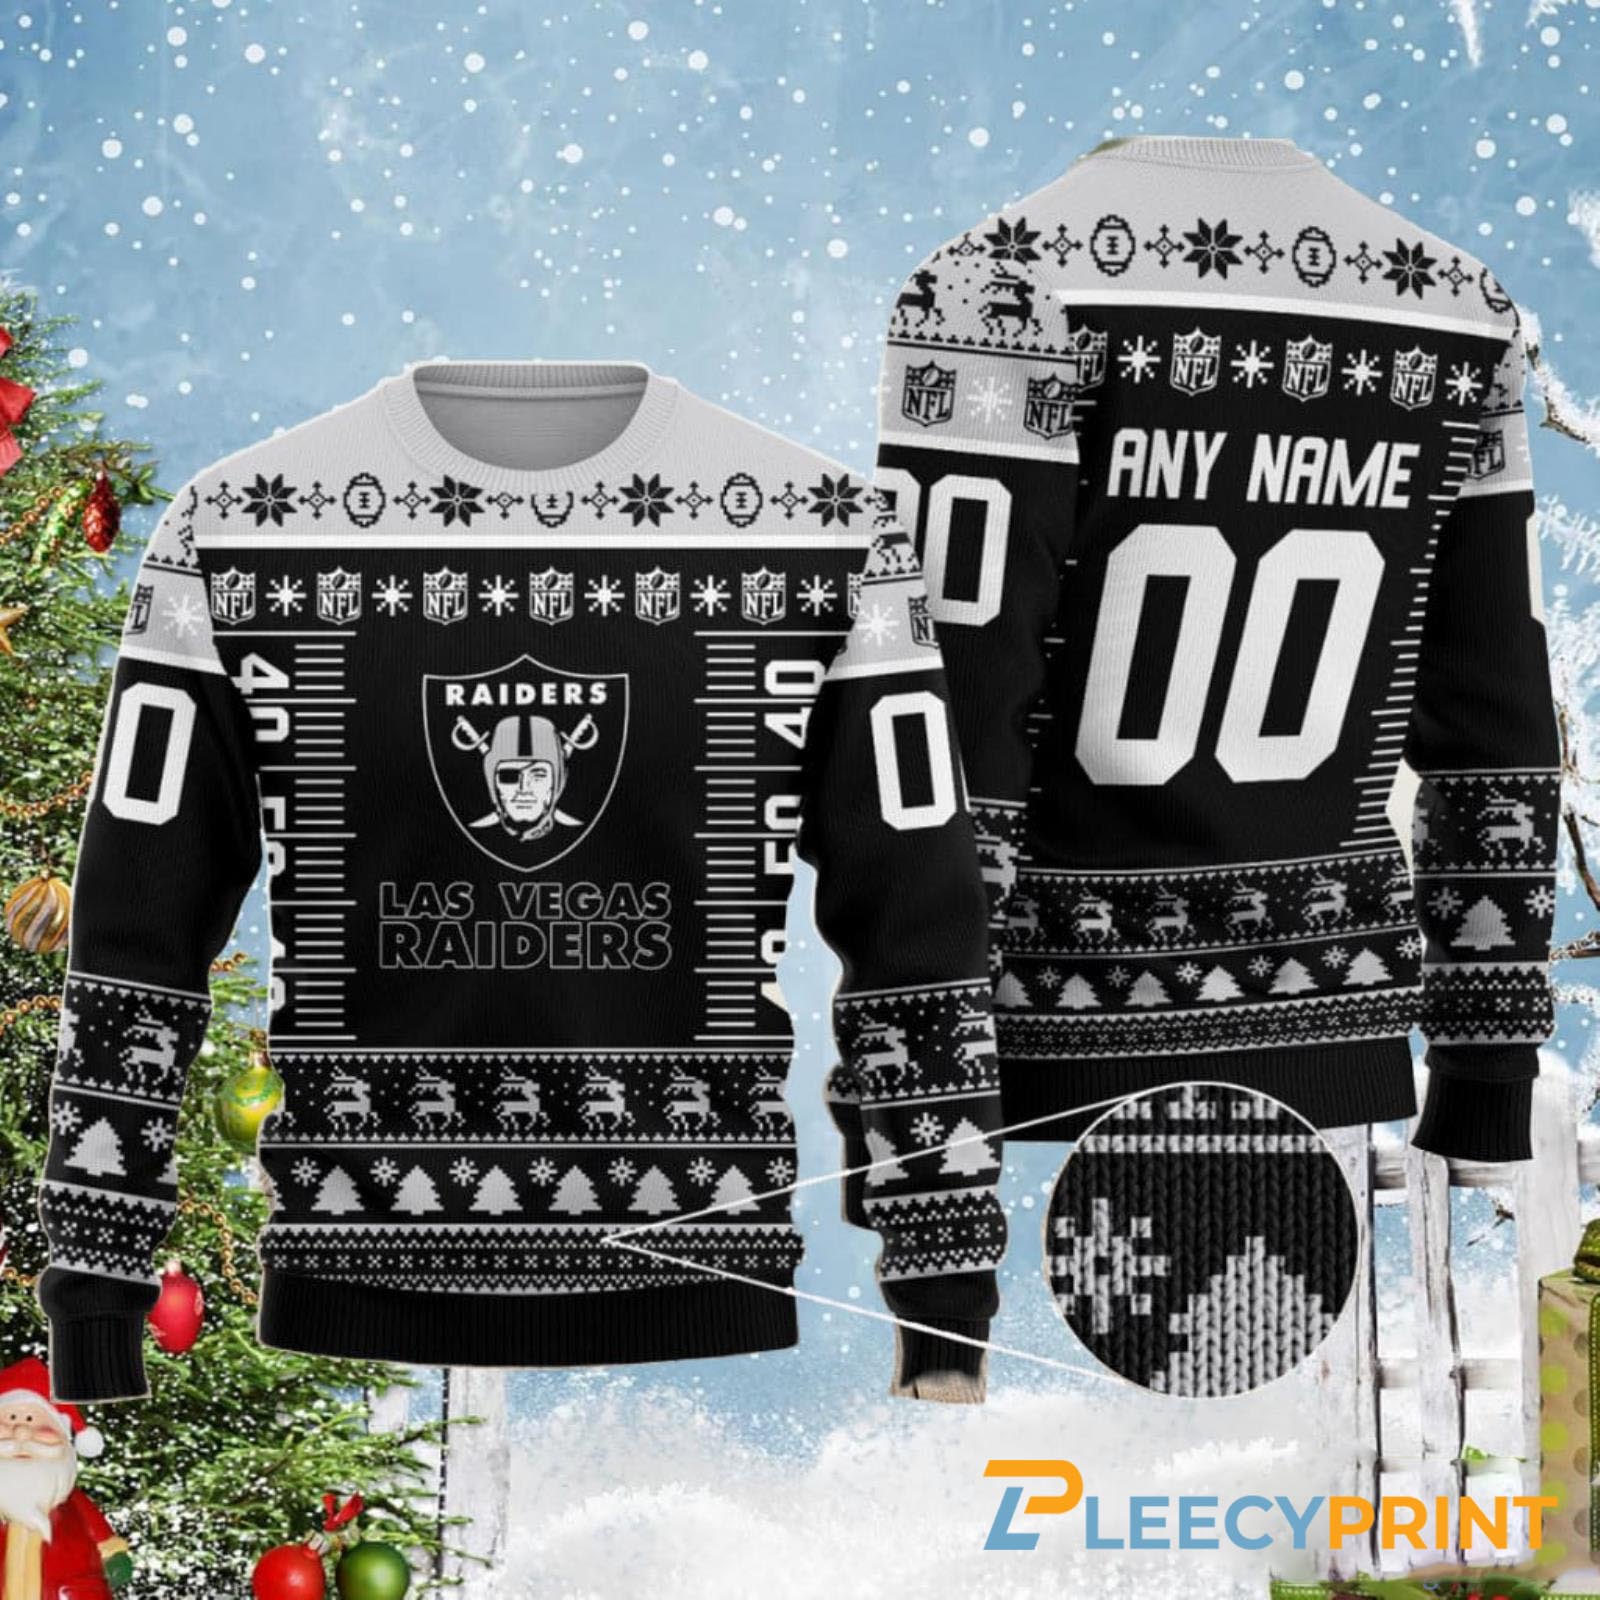 Personalized Raiders Ugly Sweater - NFL Logo Las Vegas Raiders Ugly Christmas Sweater